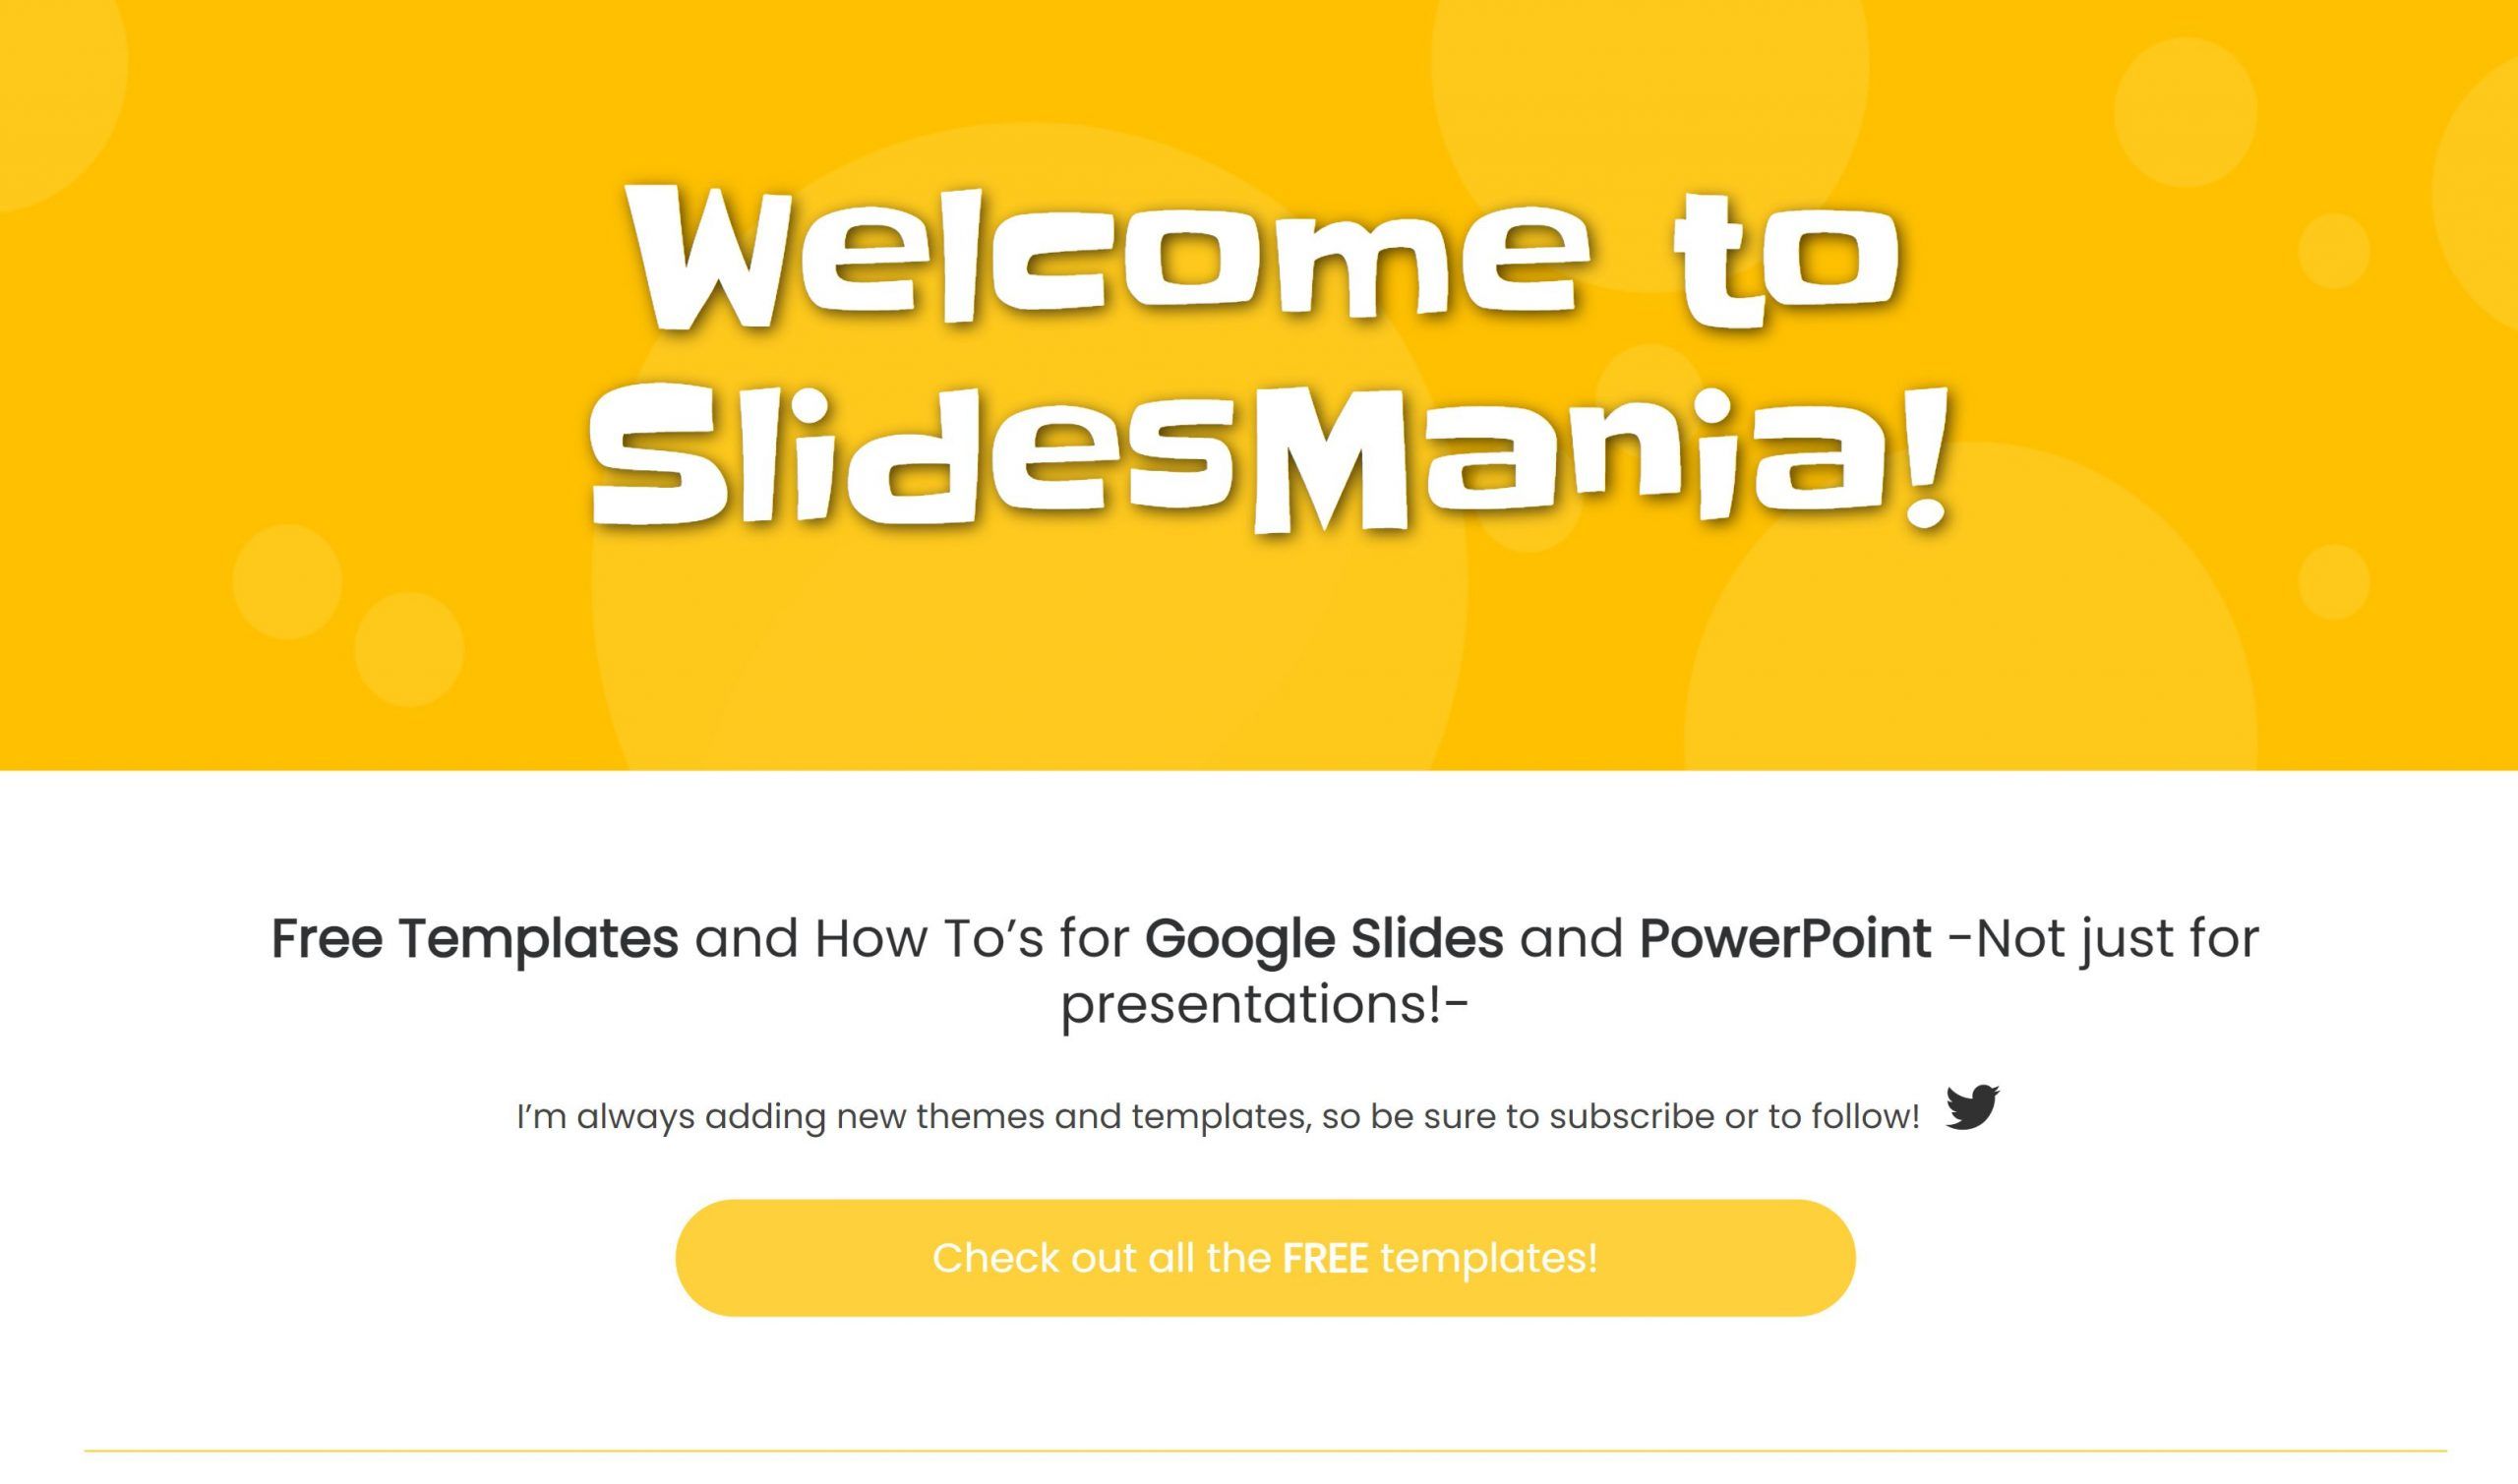 Download Slidesmania Free Google Slides Themes And Powerpoint Templates